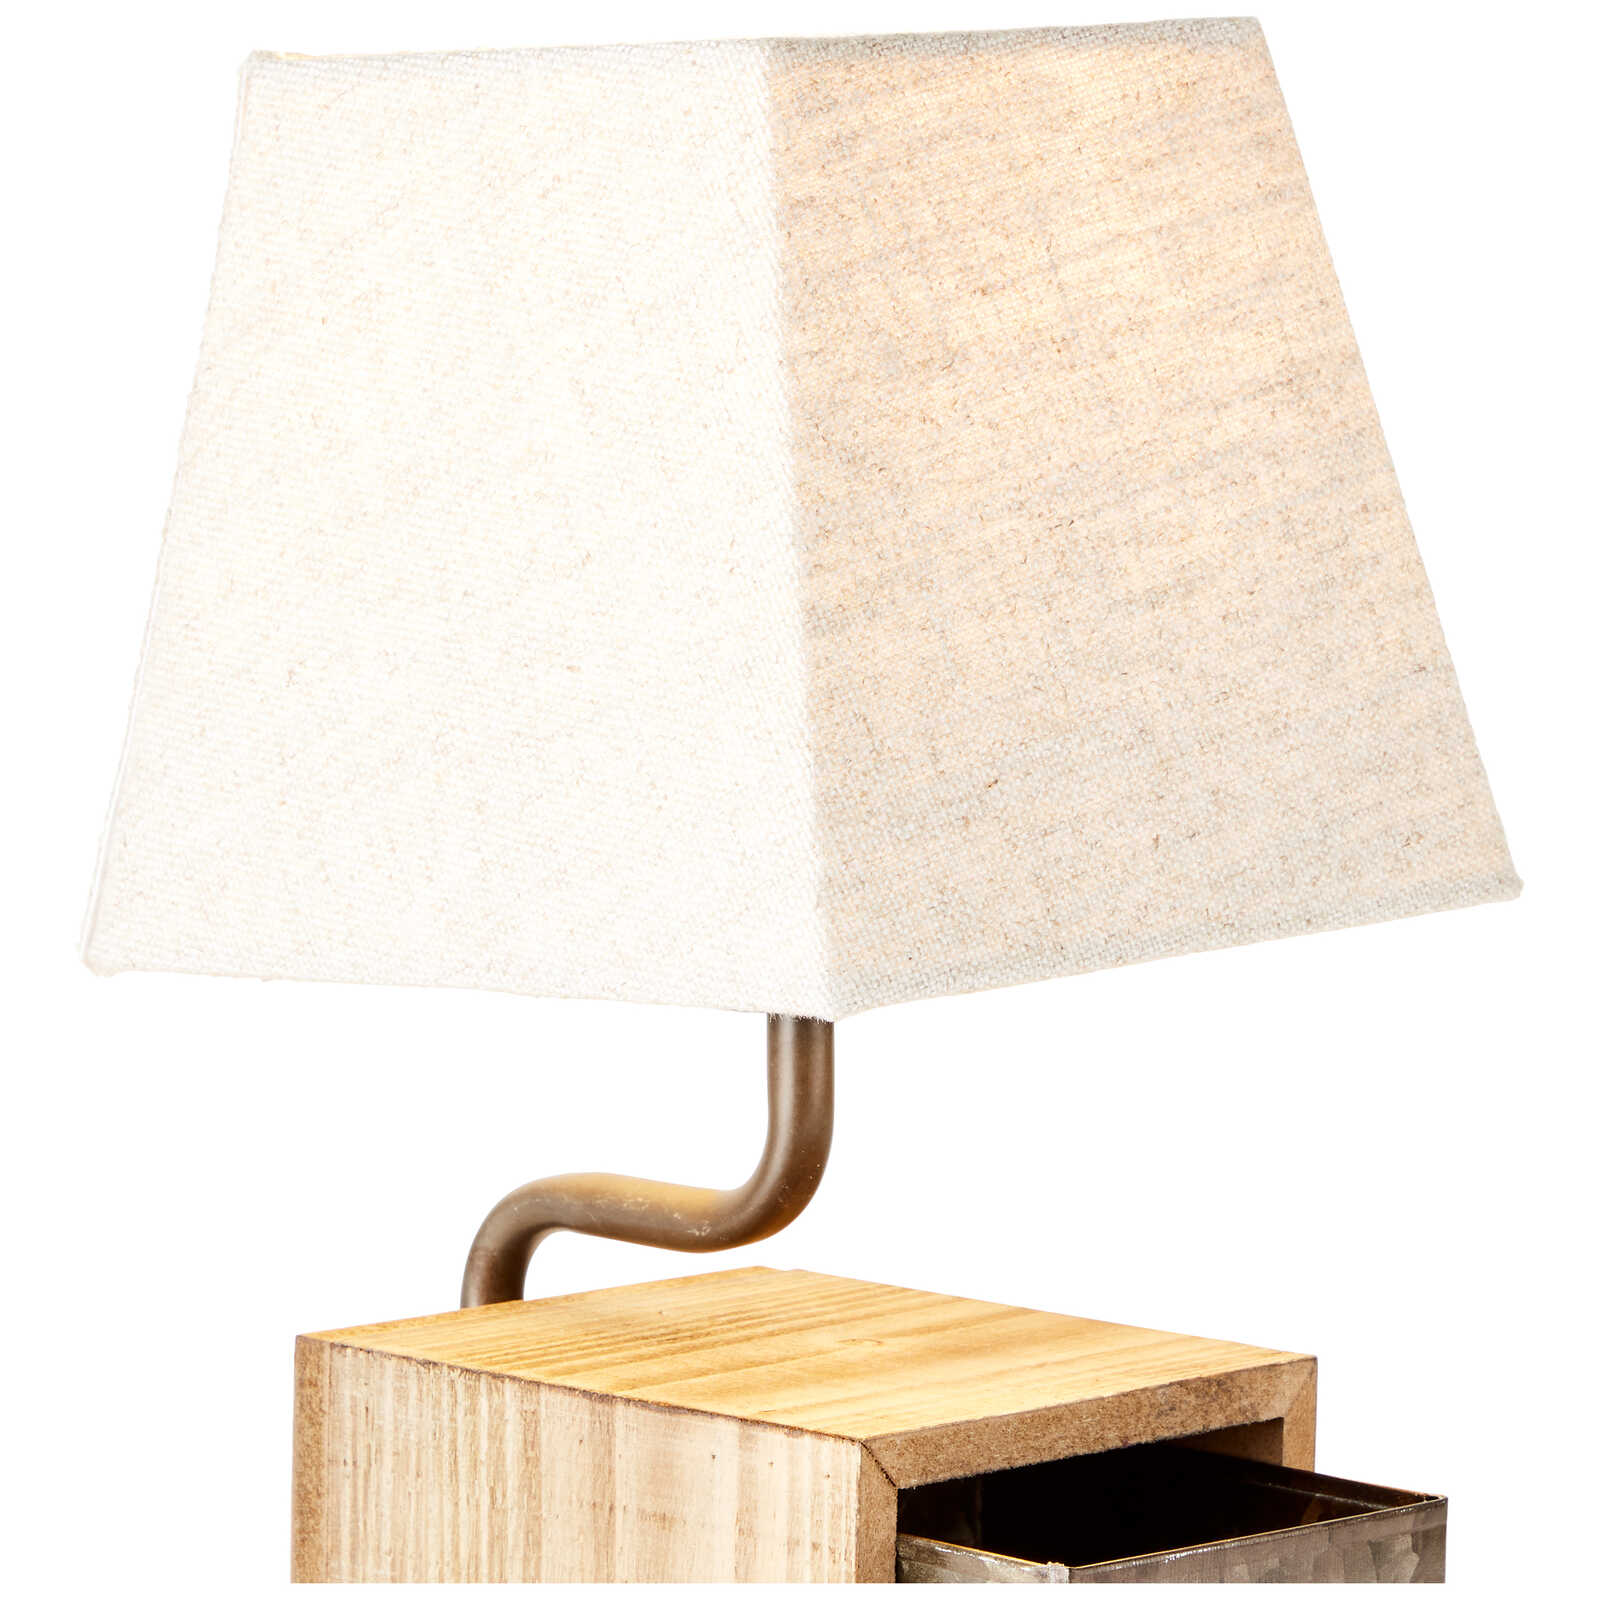             Wooden table lamp - Dominic - Brown
        